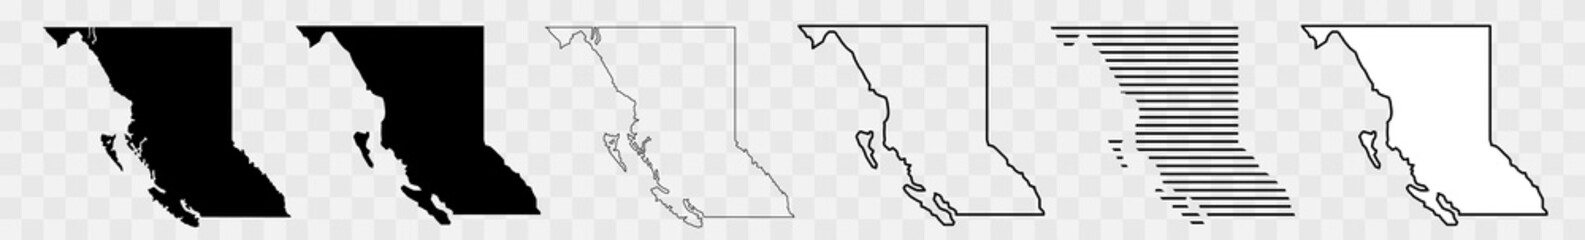 British Columbia Map Black | Province Border | Canada State | Canadian | America | Transparent Isolated | Variations